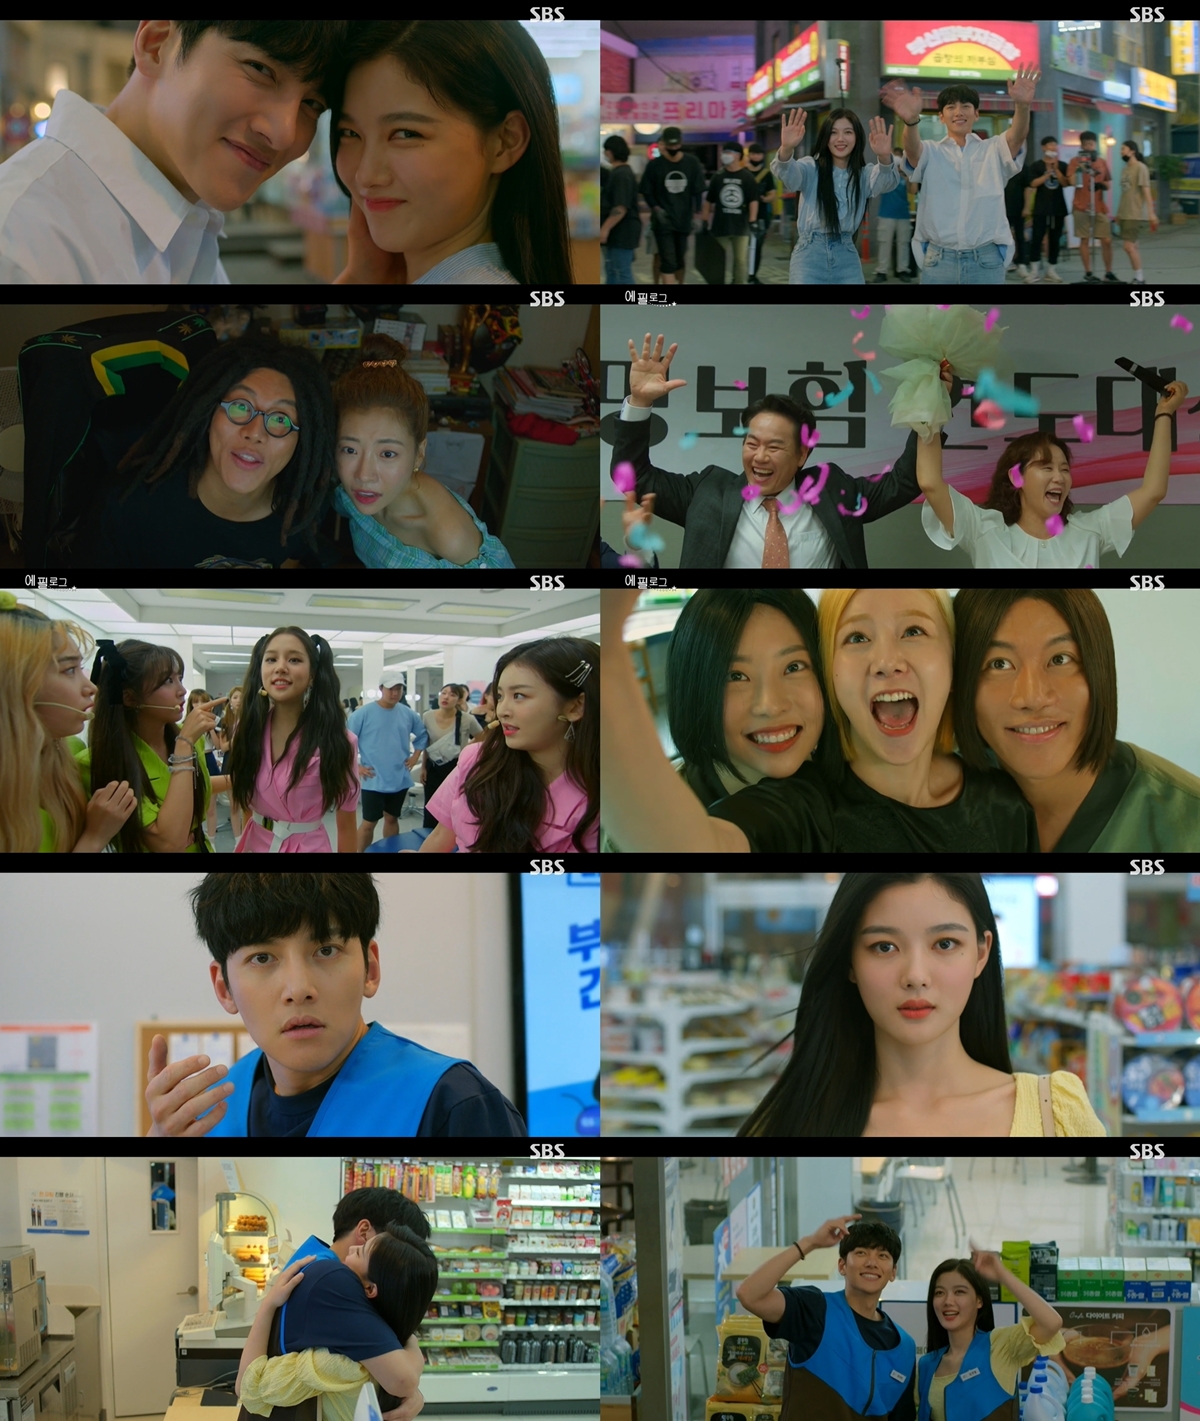 The 24-hour Convenience store romance of Ji Chang-wook and Kim Yoo-jung ended.On the 8th, SBS gilt drama Convenience store Morning Star (playplayplay by Son Geun-joo/director Lee Myung-woo/Produced by Taewon Entertainment) ended.The final episode of Convenience Store Morning Star recorded 10.7% of the Seoul metropolitan areas household ratings (based on 2 copies, Nielsen Korea), 2049s ratings recorded 5.2%, and the highest audience rating per minute soared to 11.5%, all of which recorded their highest ratings.Therefore, Convenience store morning star kept the top spot in the entire mini series for 8 consecutive weeks from the first broadcast, and won the beauty of the kind.In the final episode of Convenience Store Morning Star, Choi Dae-heon (Ji Chang-wook) and Kim Yoo-jung all returned to the Convenience Store and showed Happy Endings seeking dreams and love.Choi Dae-heon promised to wait until I come back to the star who went down to the country flower farm.And realizing that he was a Convenience store, he quit his advisory committee at the headquarters and returned to Jongno Shinseong branch manager.Choi Dae-heon put on the Alba Saving Box paper and waited for the star.Choi Dae-heon said, My mother always tells me not to live like this, but I will live like my mother Father, and I can not live without taking care of each other even if I am a tit-for-tat.I believe that this is happiness and greater value.Later, the star returned to the Convenience store of Choi Dae-heon waiting for him.The Alba Goods announcement read the letter Subscription Qualification Star.The two people who seemed to have returned to the time when they came to the first Alba interview with the Convenience store were reproduced.Choi Dae-heon, who laughs happily while confirming each others hearts, and Jeong Sae-sungs figure is drawn as a new webtoon by Han Dal-sik (Mun Moon-seok), and decorated the last chapter of the 24-hour Convenience store romance.Hot Summer Days by Ji Chang-wook X Kim Yoo-jung, Believe in the BoatJi Chang-wook and Kim Yoo-jung, who played Hot Summer Days at the center of Convenience store morning star, confirmed the true value of the actor who once again believes.Ji Chang-wook delightfully led the play with natural life acting, comic acting that was broken.Viewers were forced to fall in love with Ji Chang-wooks Hot Summer Days, which made use of the charm of Choi Dae-heon, a mild-tasting manager.Kim Yoo-jung is a character of a spicy alba star, and showed an act that crosses comic, romance and action.Kim Yoo-jung, not a star, is an unimaginable reaction to the Convenience store star with an act of action.# Personality Characters, Fantasy Chemie of Actors Filled with DramaThe feast of character and fantasy chemistry filled the drama.Reggae Head Webtoon Writer Han Moon-siks calligraphy and bomb head Golden Bees calligraphy became a vital part of the drama as a new Stiller couple.In addition, Kim Sun-young and Choi Yong-pil of Choi Dae-heons parents, Gong Bun-hee, completed the Convenience store morning star with a delicious acting.In addition, Solvin, who plays Jung Eun-byeol, the brother of Jung Sung-byeol, has made a dream of becoming a copydol idol.# Small happiness found in everyday life + warm family loveThe space Convenience store where Choi Dae-heon and Jeongsae star made a relationship was full of warmth.After losing Father and living with his brother, Jung Sae-byeol started the Convenience store Alba and was comforted by Choi Dae-heon and his family and got love.In the Convenience store with the star, Choi Dae-heon, who found the value of happiness in everyday life with his family, also painted the house theater with warmth.# Comic Restaurant Drama Responsible for Laughter in Anbang TheaterConvenience store morning star, which was painted with cool laughter during the summer night of 2020, was a drama that made viewers happy with pleasant drama development and comic scenes.Ji Chang-wook and Kim Yoo-jungs film Pulp Fiction couple dance, as well as various parody, omaju, and CG production, which doubles comics, appeared every time, giving a lot of fun.Following the fever priest, director Lee Myung-woo created the comic restaurant drama Convenience store Morning Star again with a light production.iMBC  Screen Capture SBS